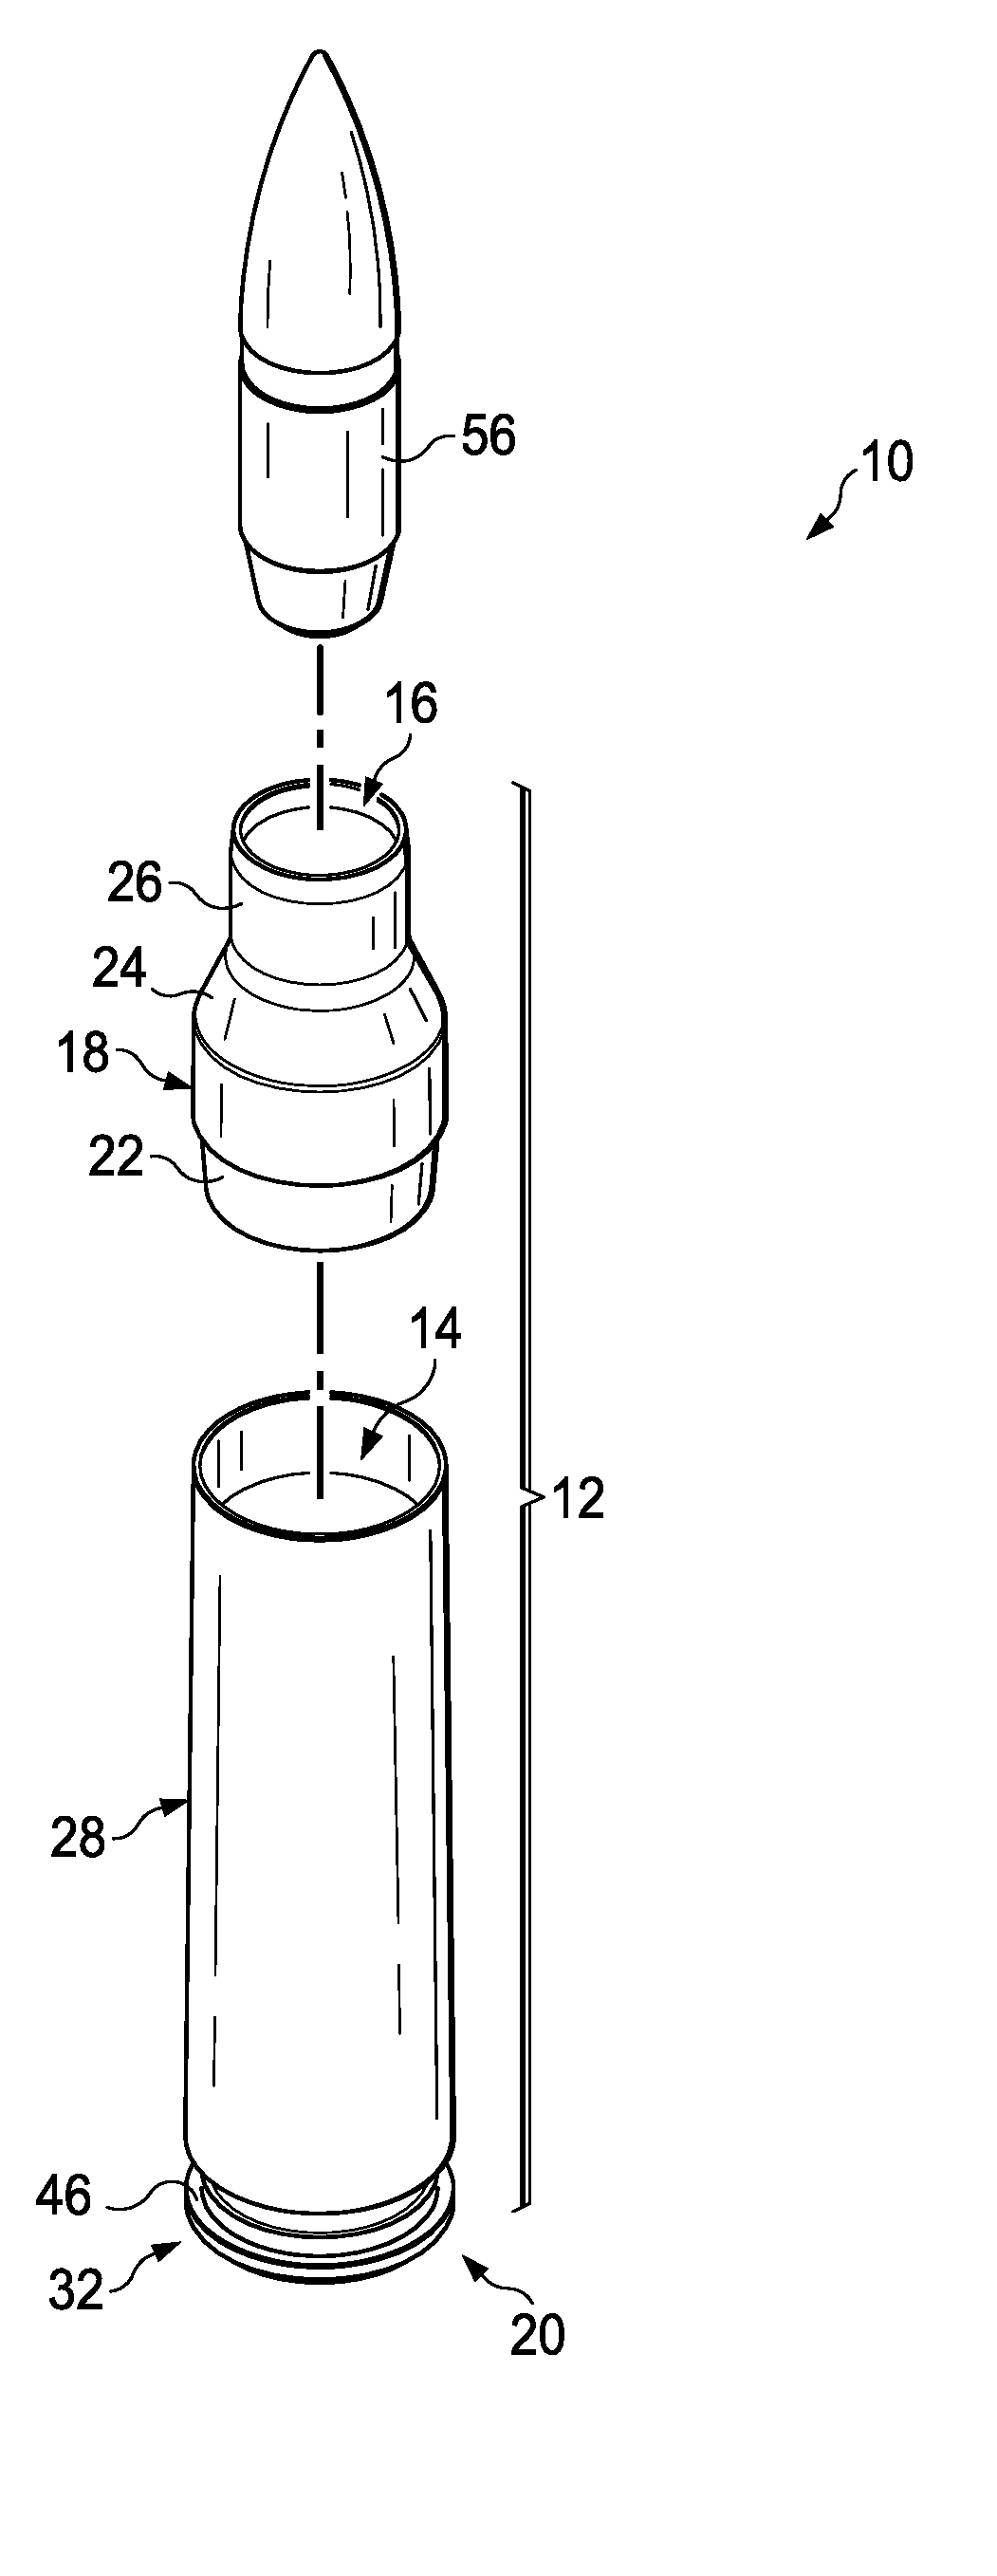 Metal injection molded projectile